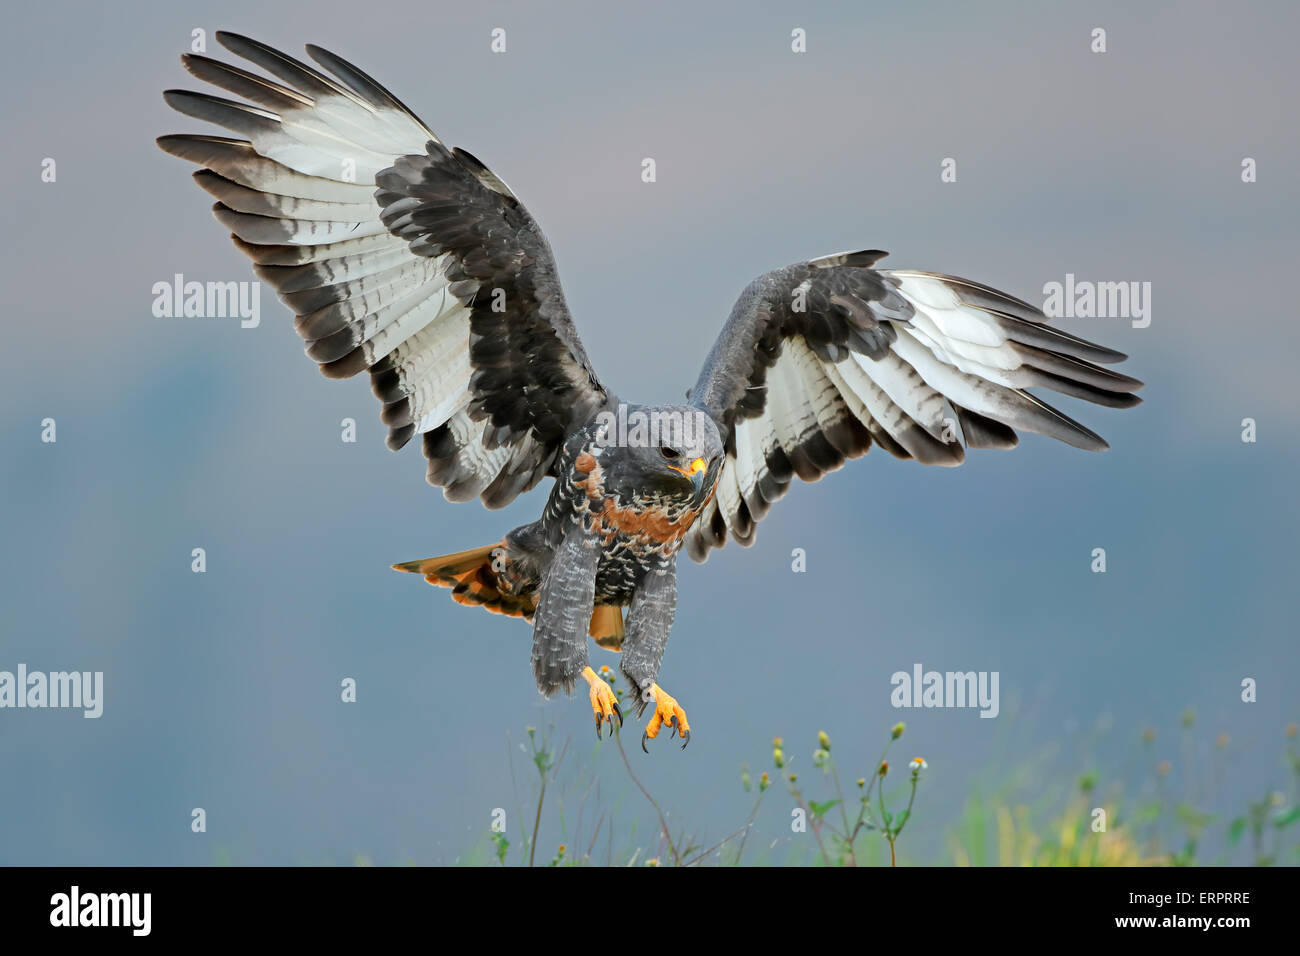 Jackal buzzard (Buteo rufofuscus) landing with outstretched wings, South Africa Stock Photo